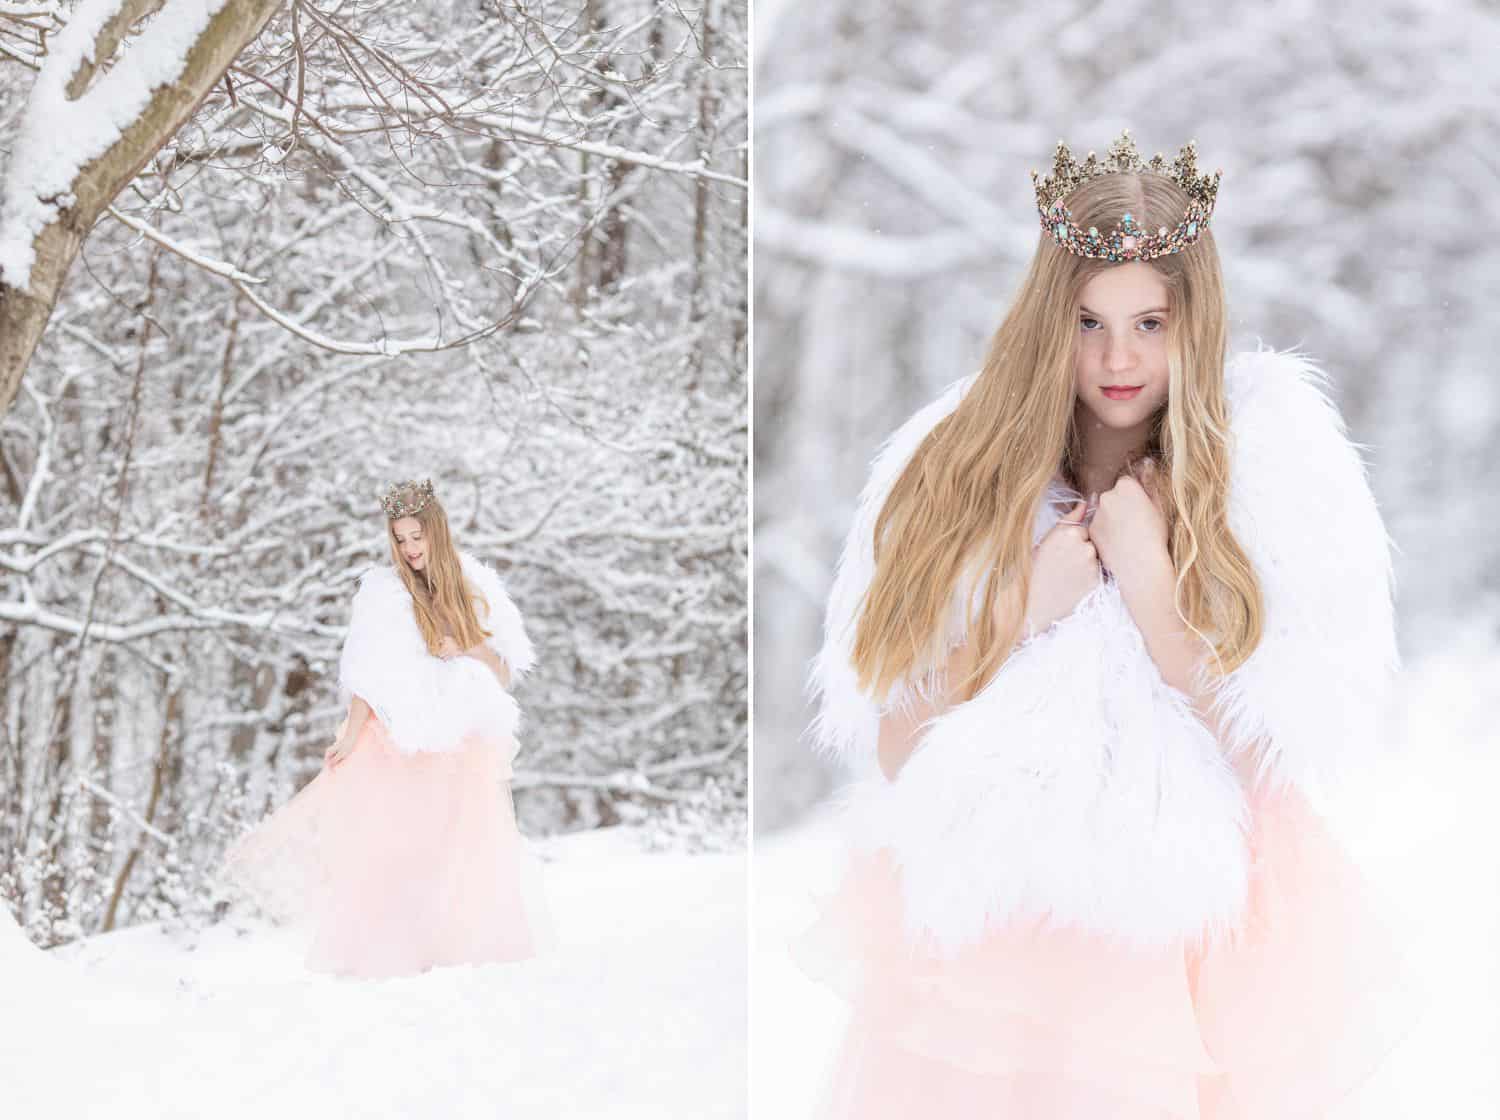 Work year-round when you book beautiful winter photography sessions! Here are the tips, tricks, and poses you need to make your winter wonderful.